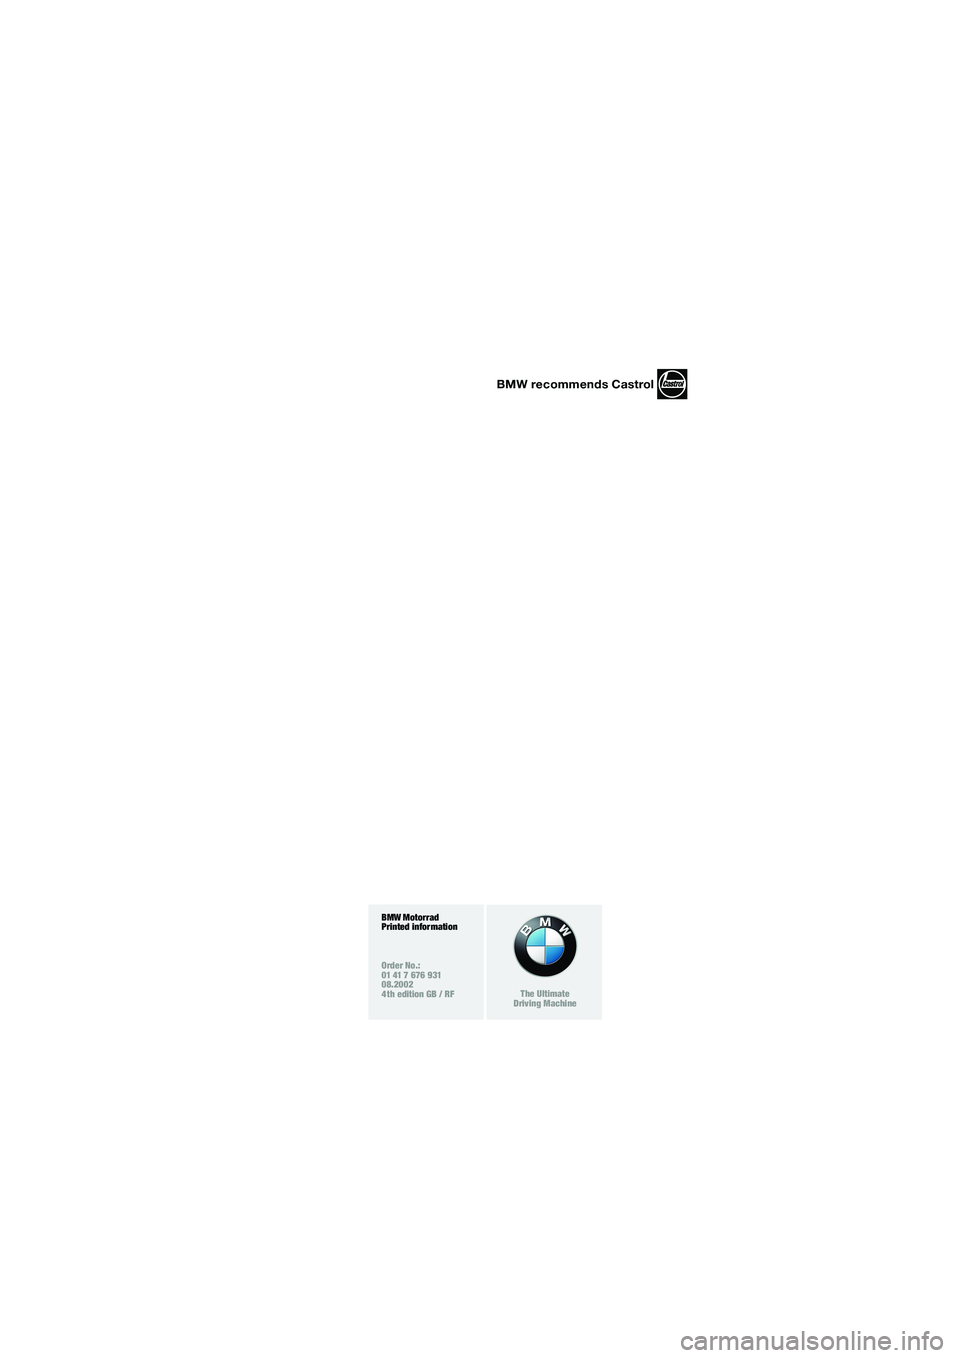 BMW MOTORRAD K 1200 LT 2002  Riders Manual (in English) BMW recommends Castrol
BMW Motorrad
Printed information
Order No.:
01 41 7 676 931
08.2002
4th edition GB / RF
The Ultimate
Driving Machine
10LTbkg4.bk  Seite 103  Dienstag, 27. August 2002  8:28 08 